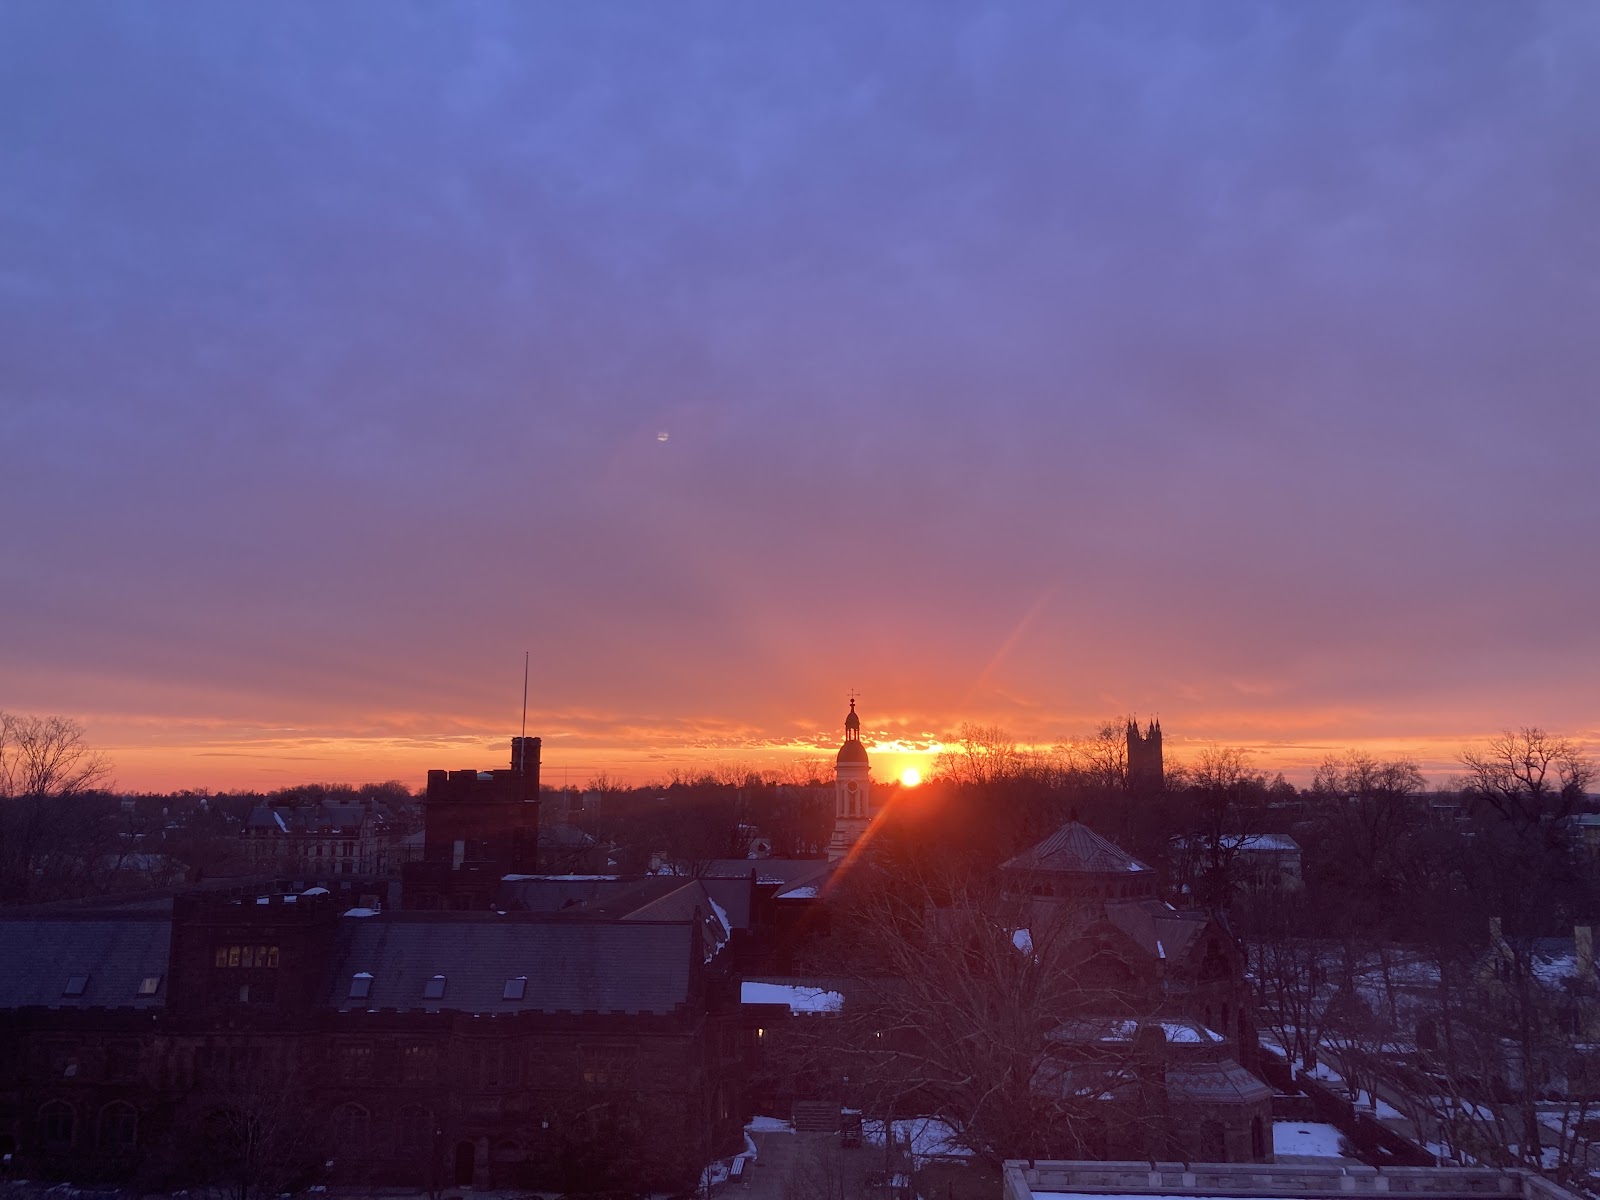 The sun sets creating a pink and purple sky behind a silhouette  of Nassau Hall and other campus buildings